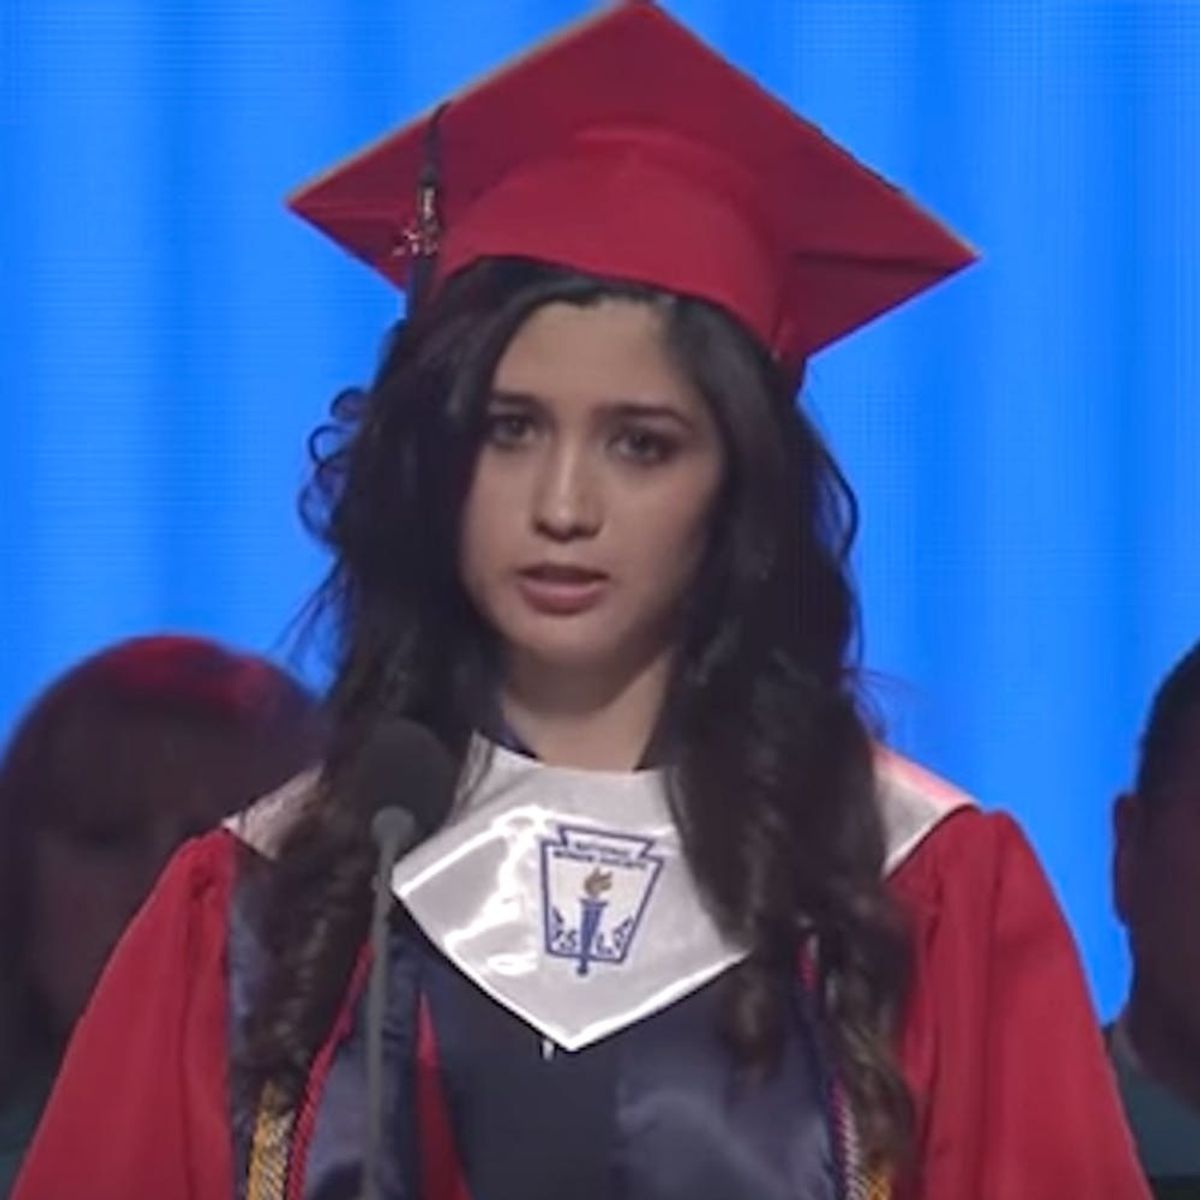 This High School Valedictorian’s Moving Speech Is Going Viral for a Very Good Reason